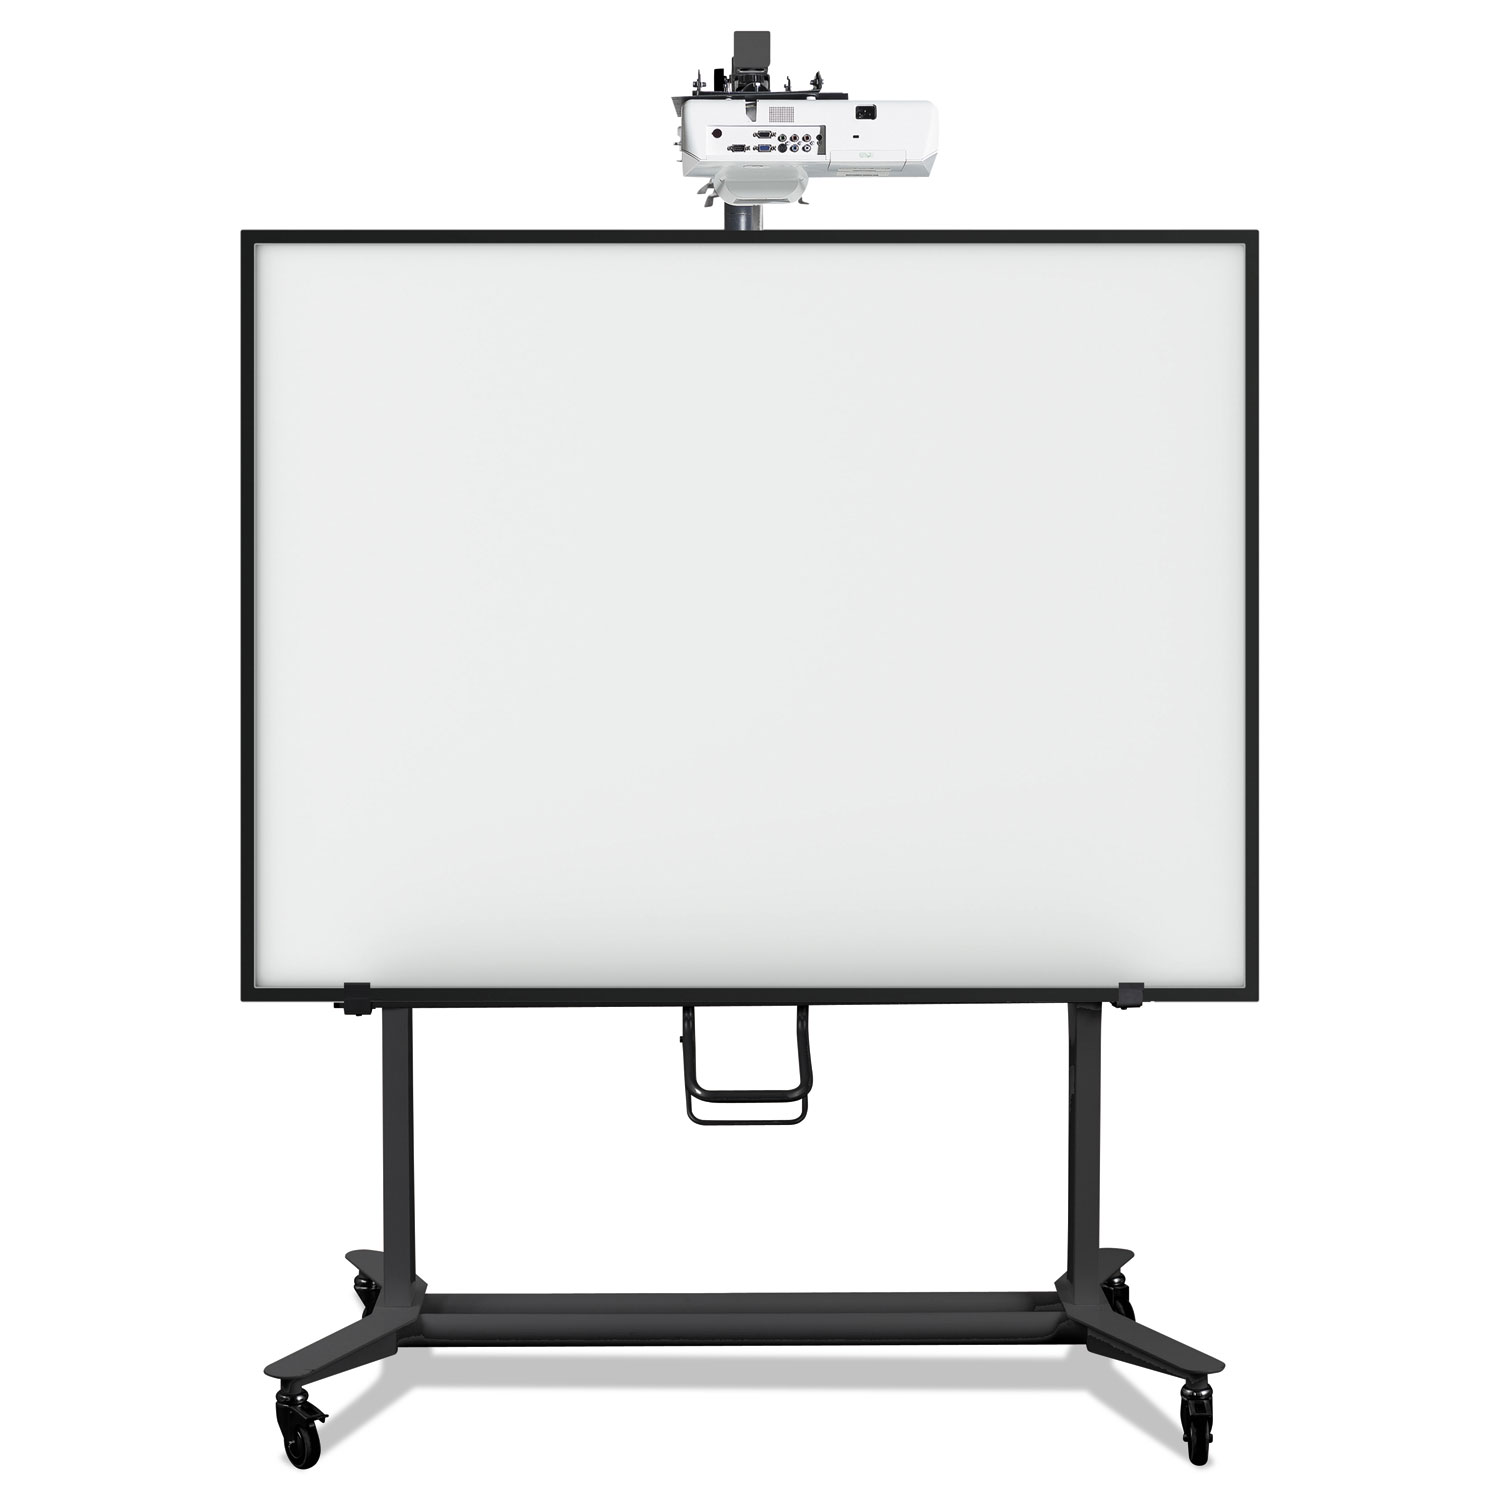  MasterVision BI350420 Interactive Board Mobile Stand With Projector Arm, 76w x 26d x 80h, Black (BVCBI350420) 